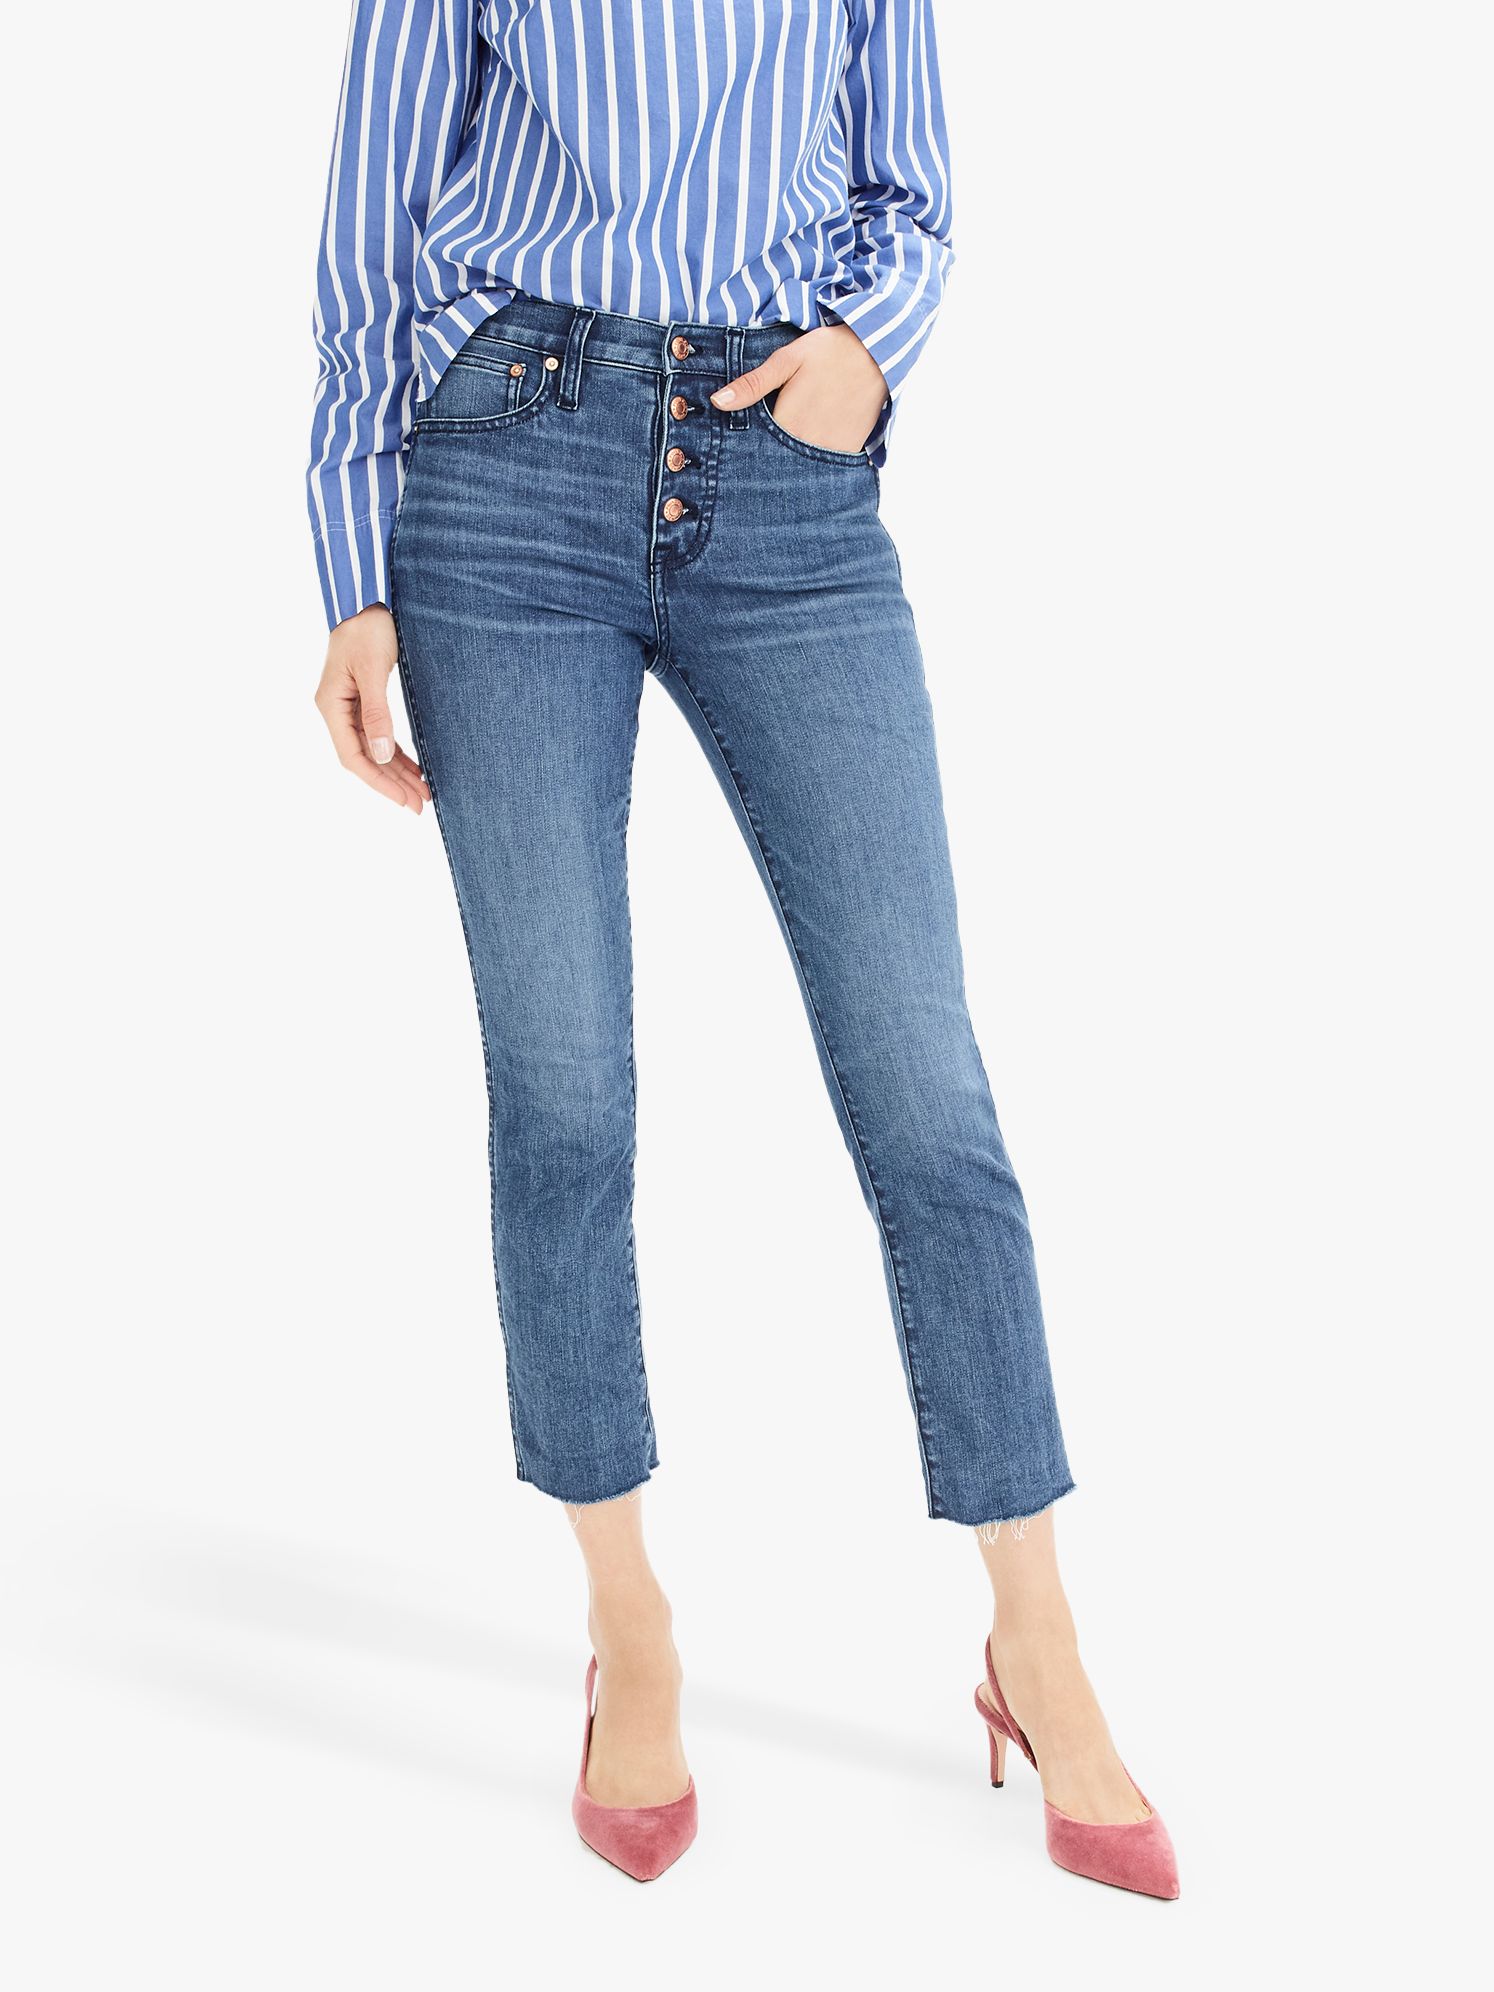 J.Crew Vintage Straight Button Fly Eco Jeans